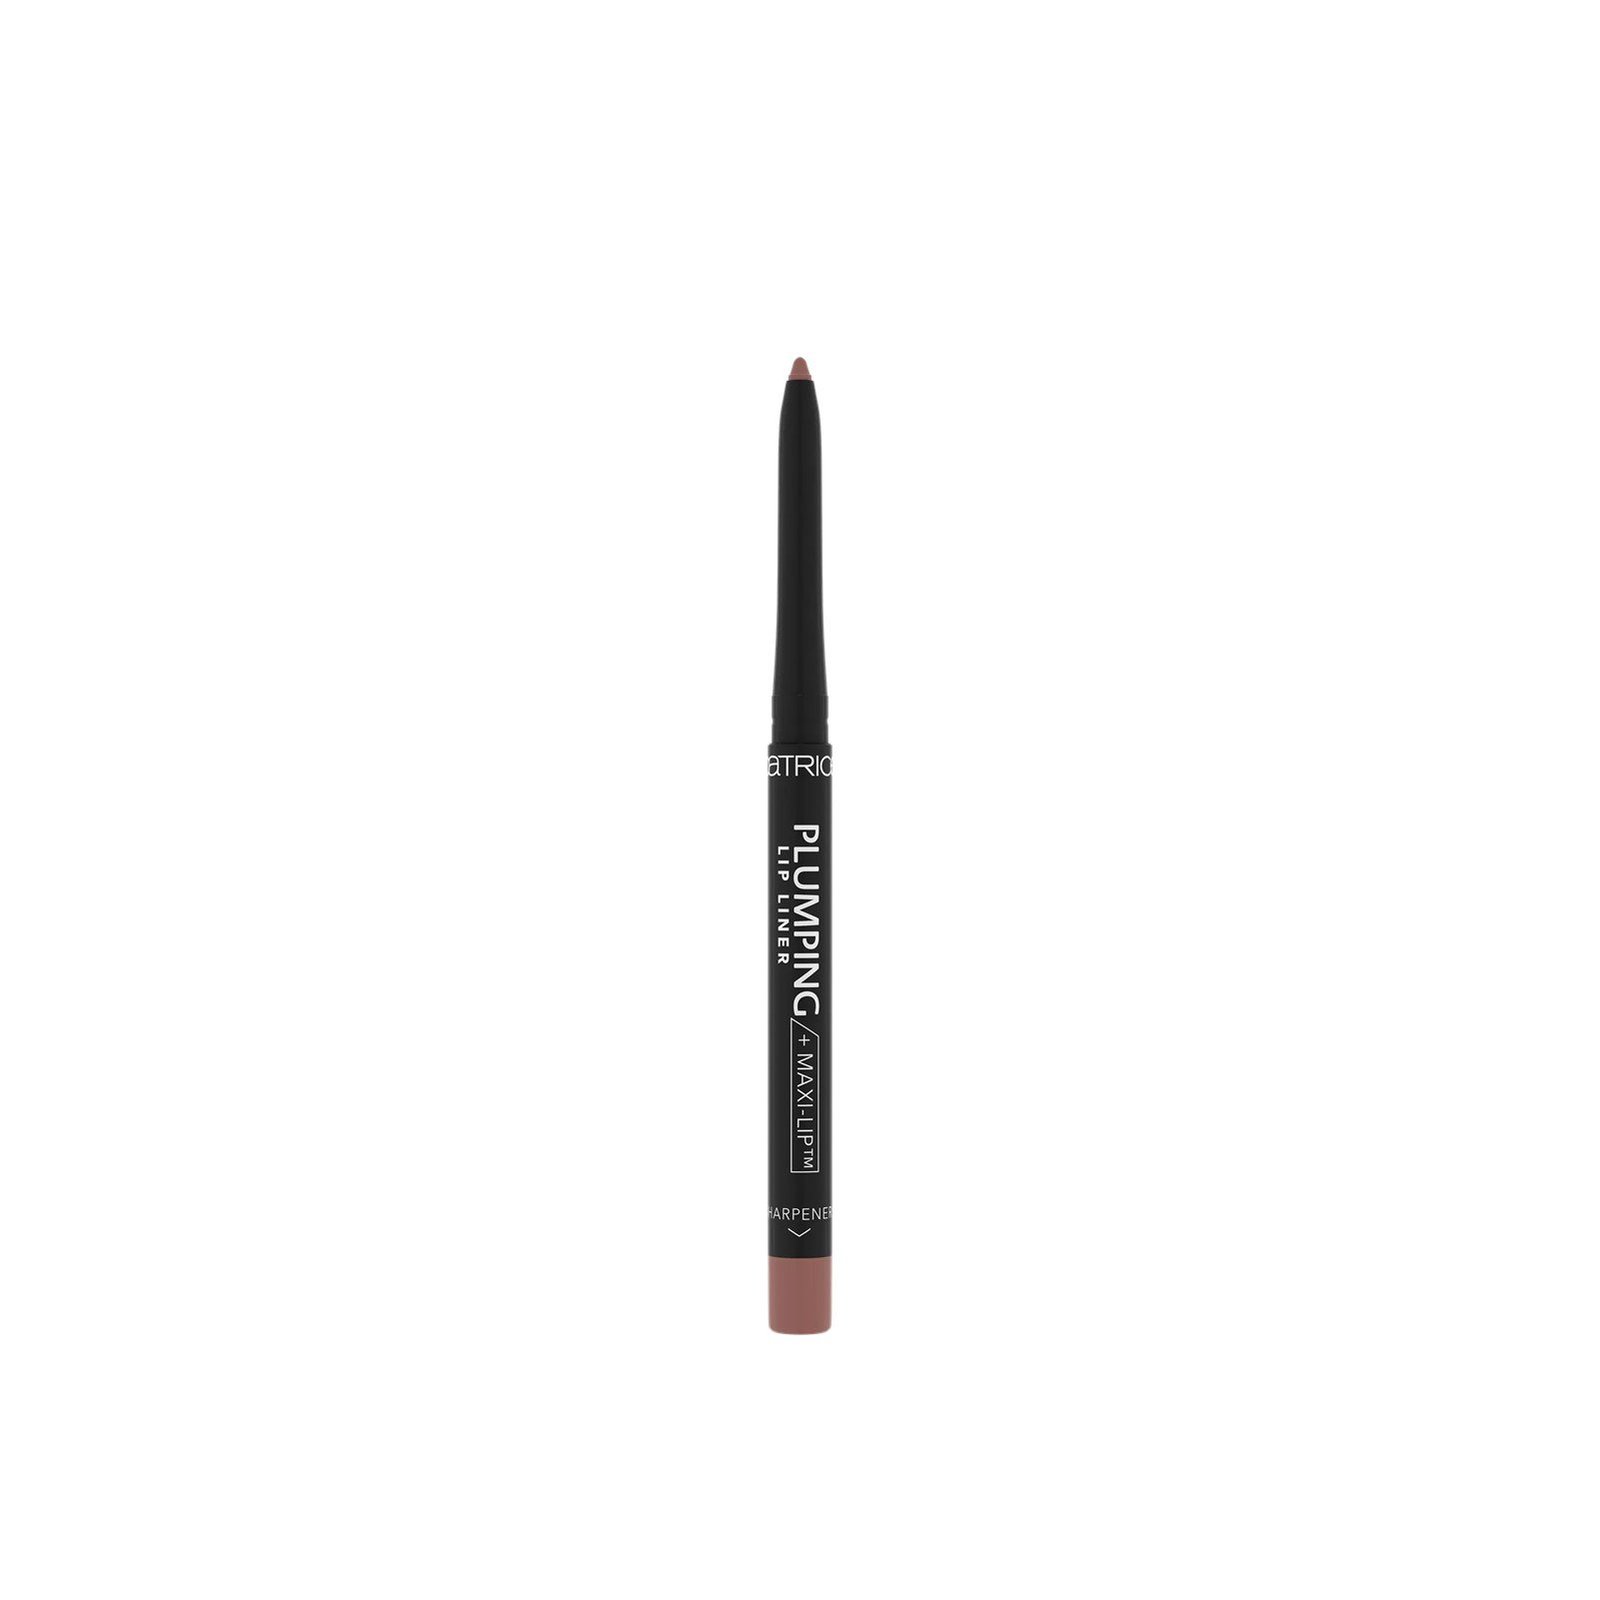 Catrice Plumping Lip Liner 150 Queen Vibes 0.35g (0.01oz)